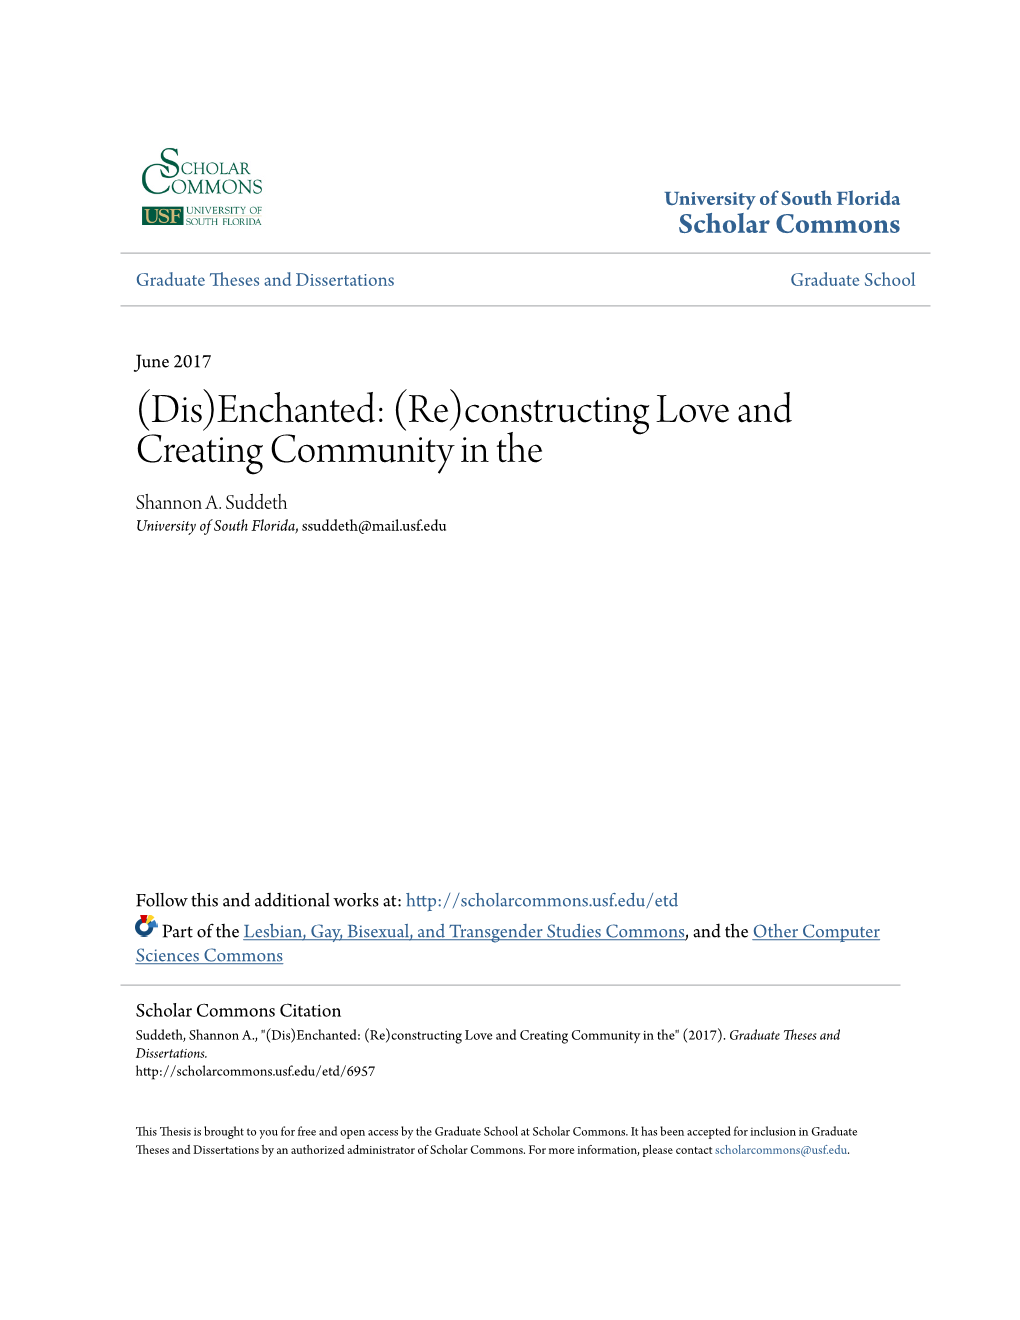 (Dis)Enchanted: (Re)Constructing Love and Creating Community in the Shannon A